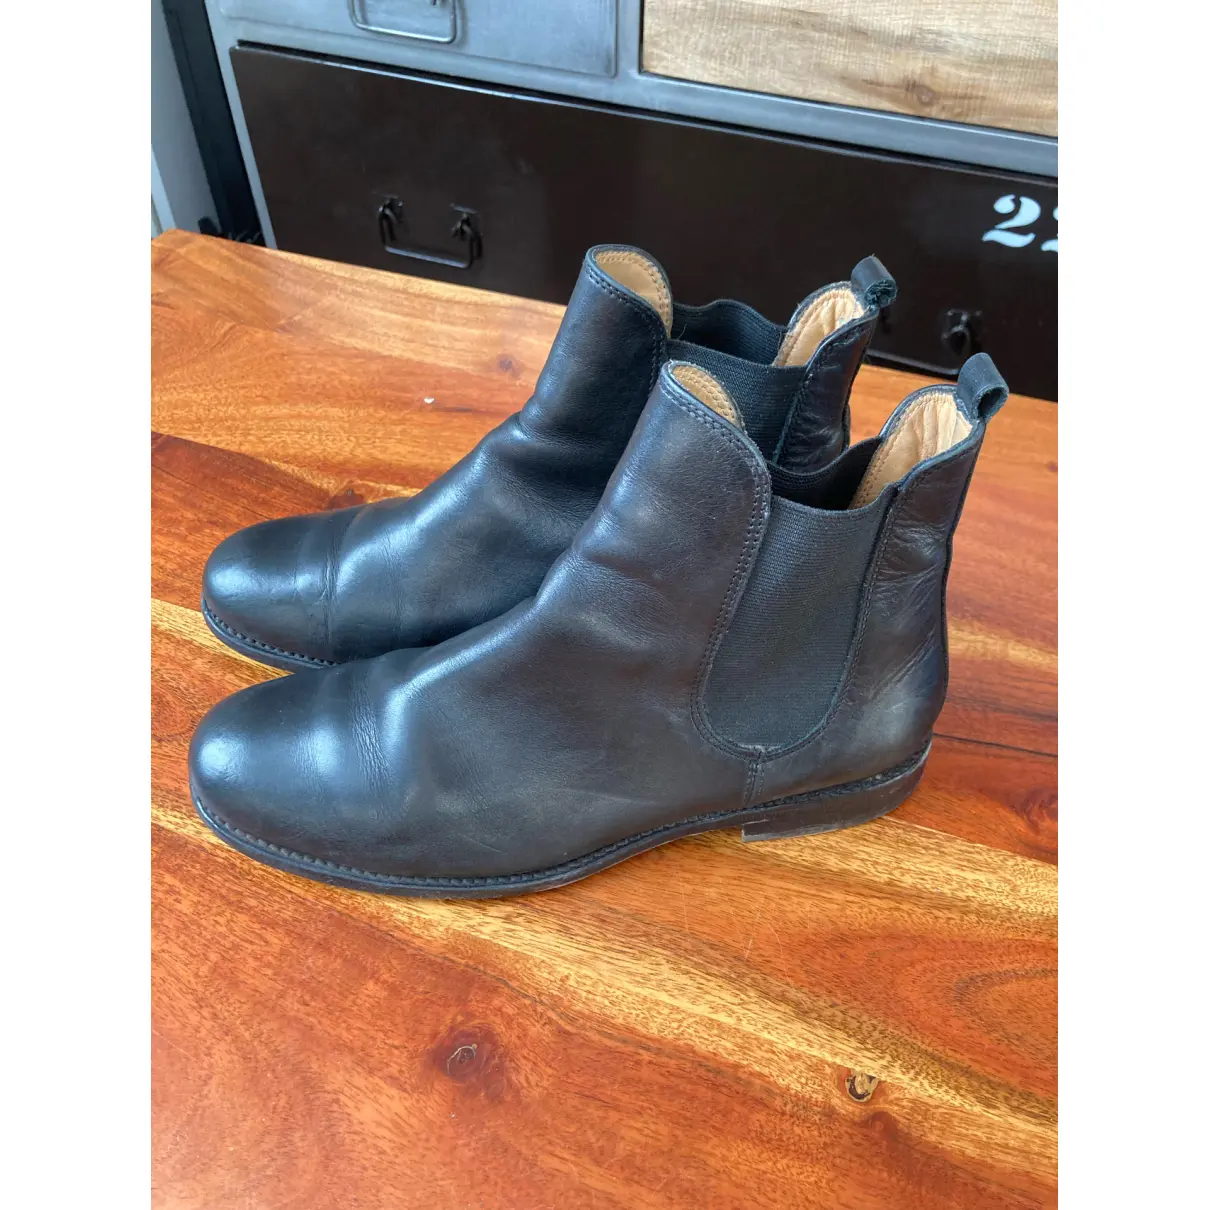 Buy Bowen Leather ankle boots online